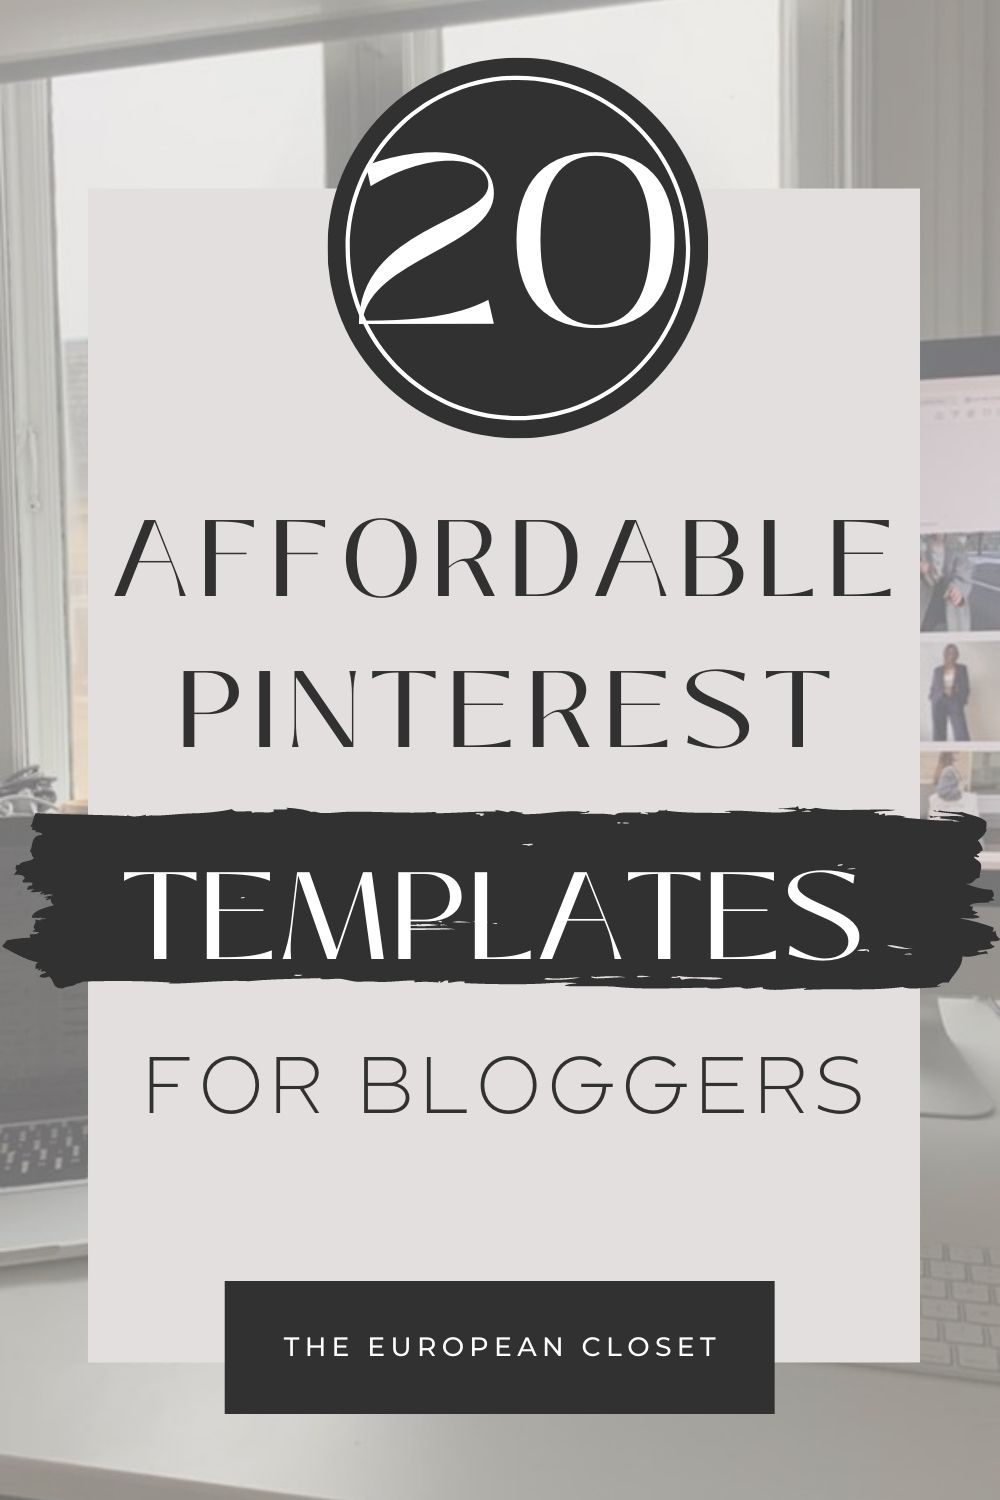 If you’re looking for super cute and simple-to-use Pinterest templates for bloggers, you’ve come to the right place.